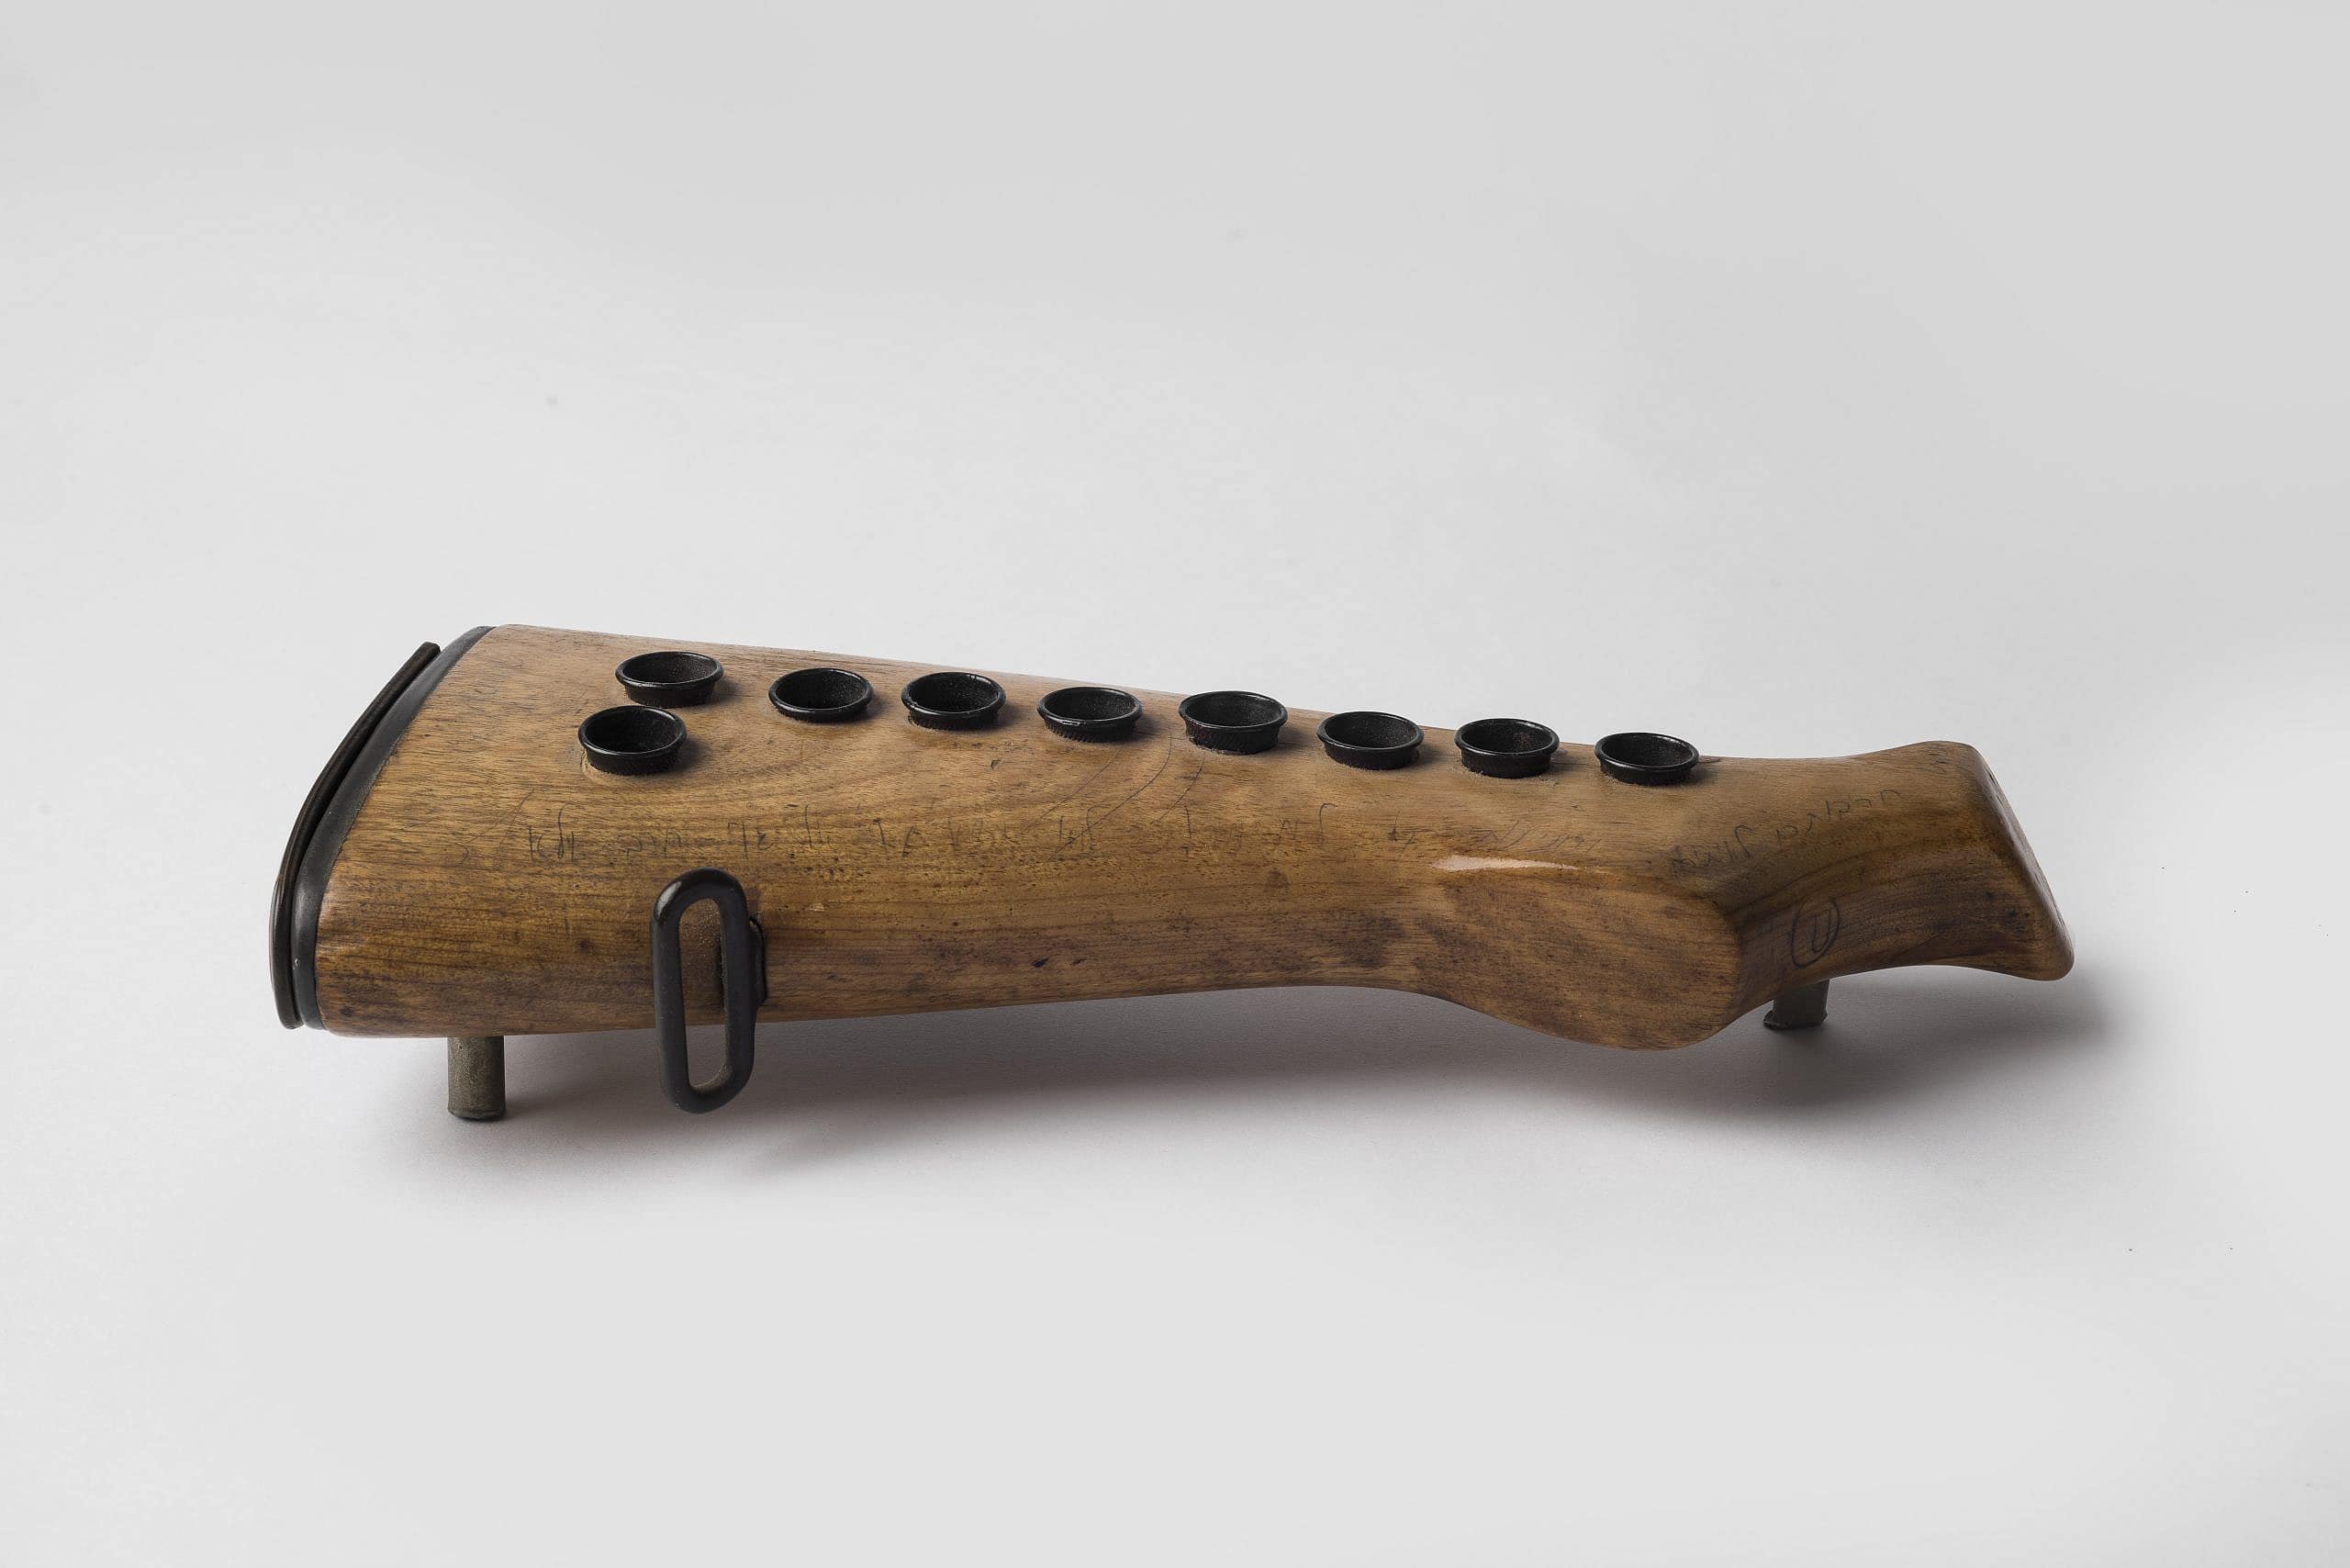 A Chanukah lamp made from a rifle butt, as featured at the Israel Museum in Jerusalem. Photo by Laura Lachman.